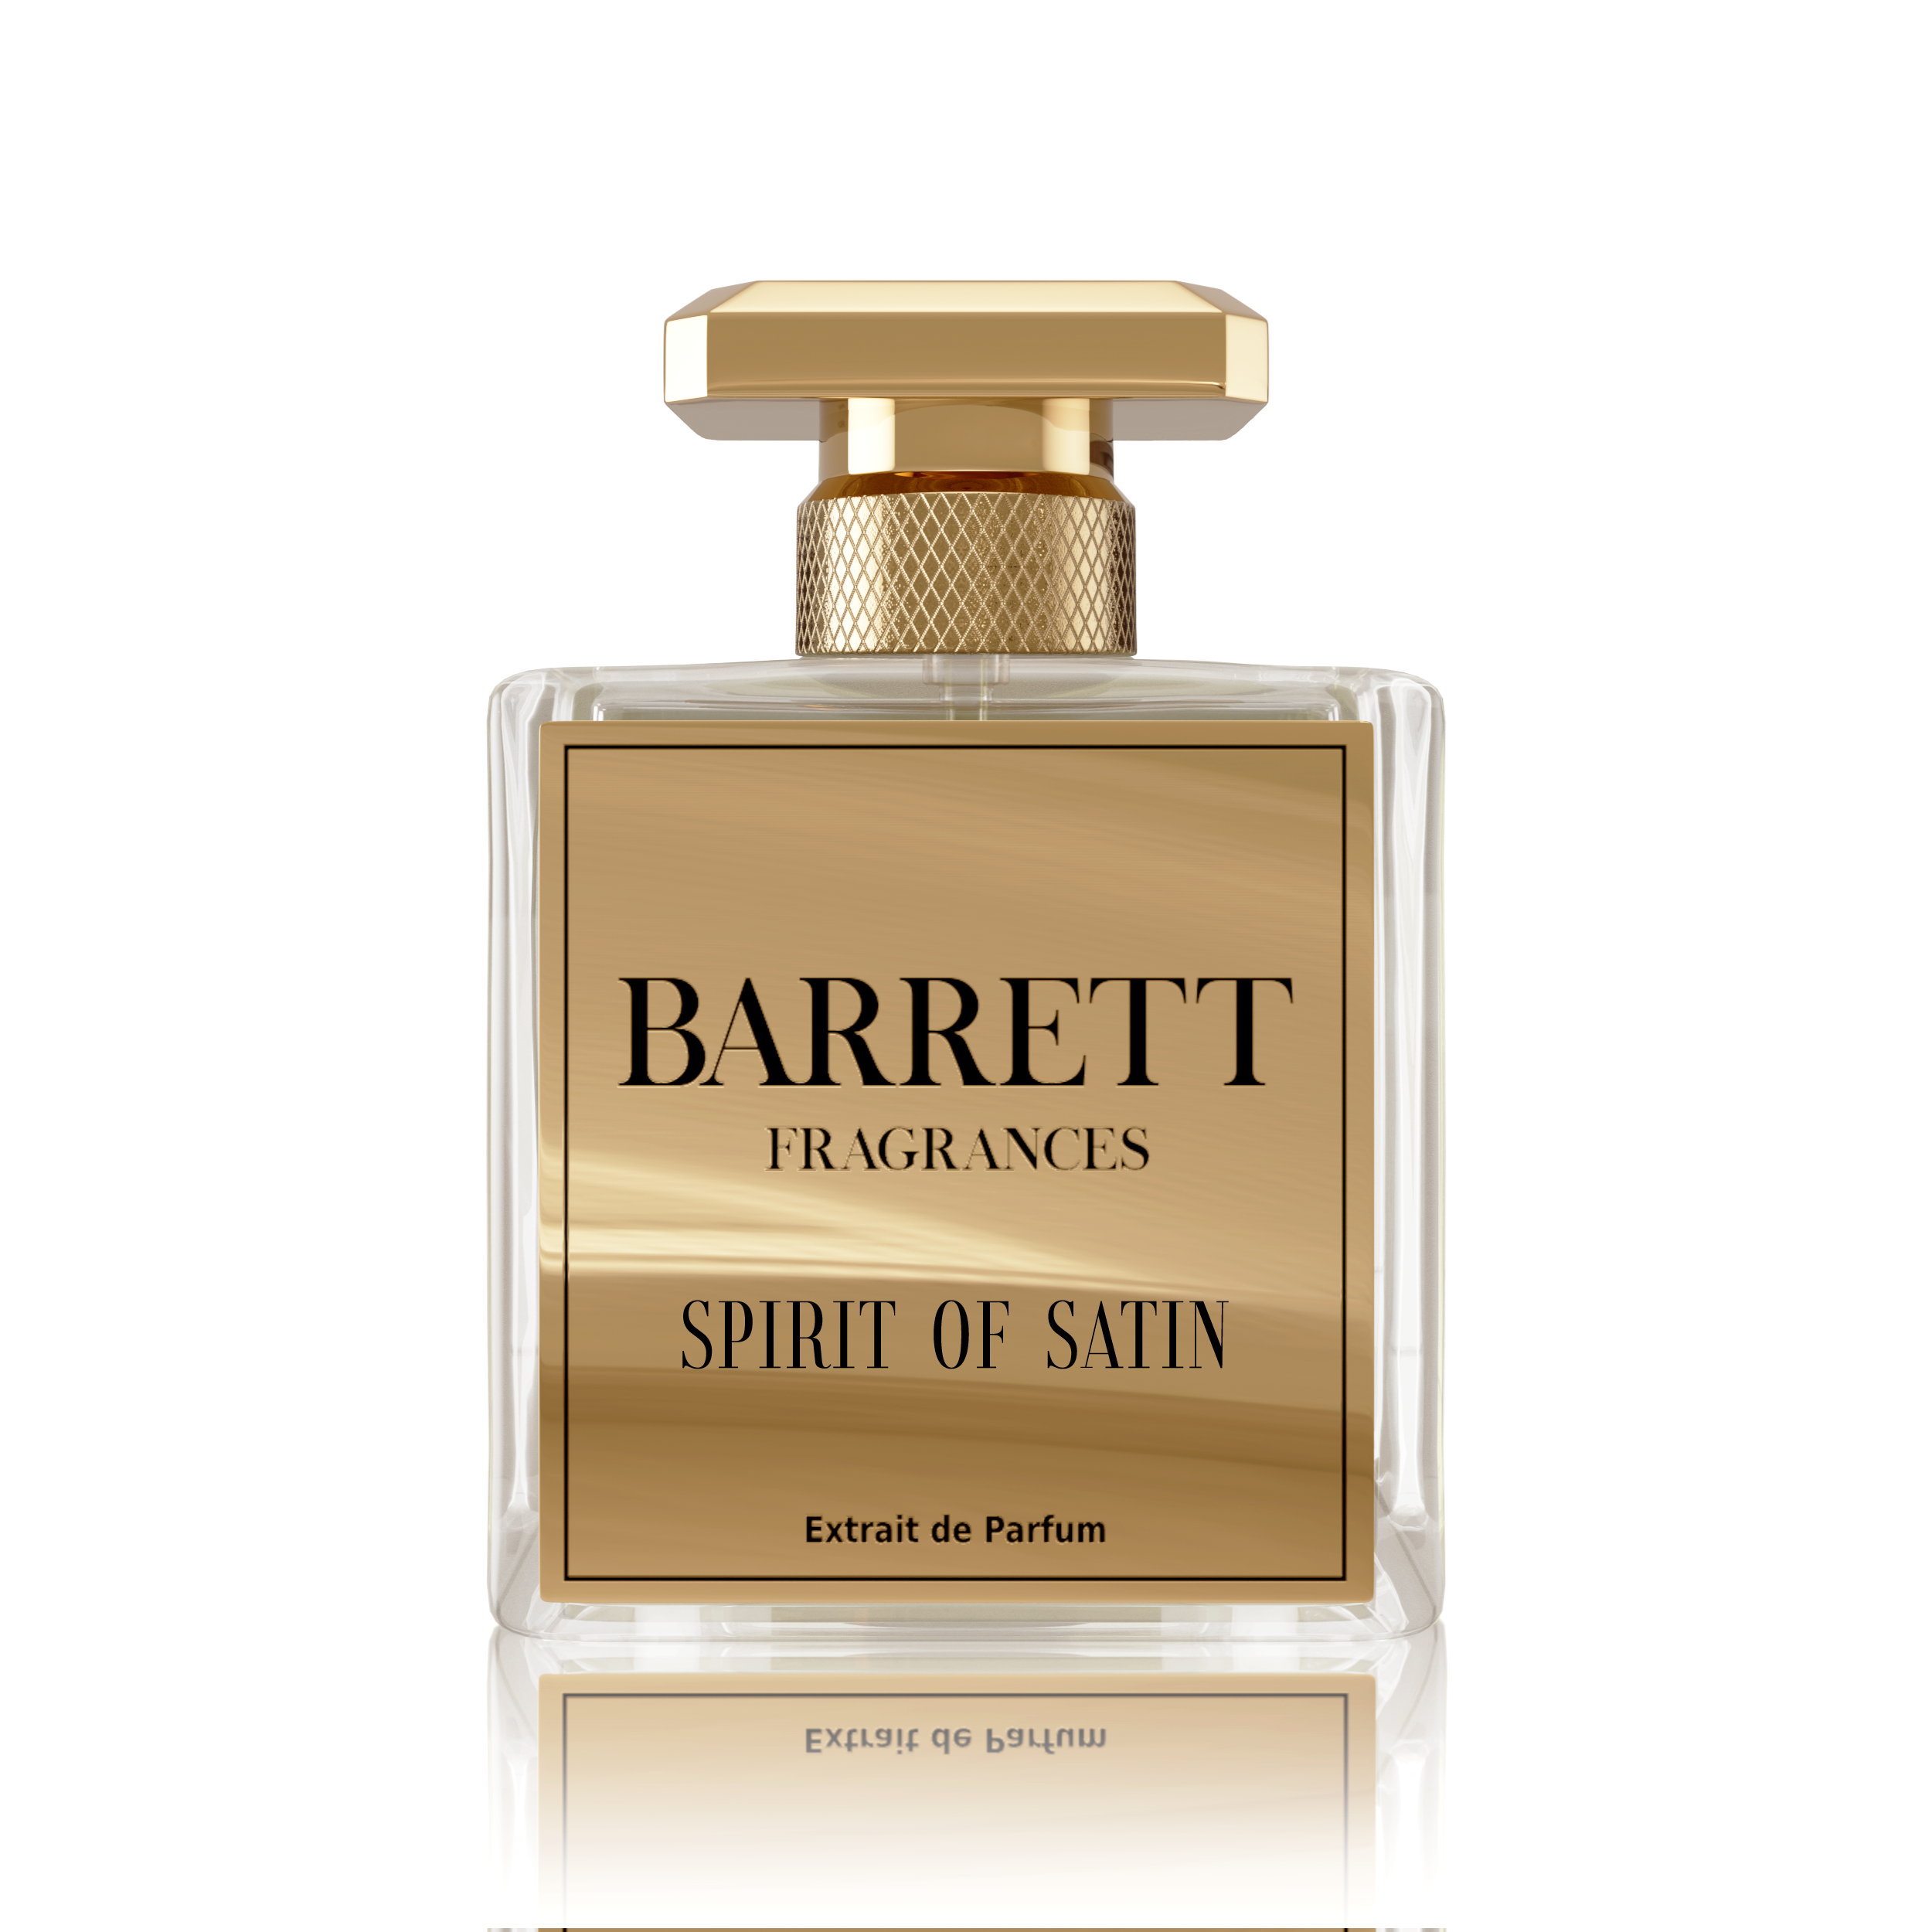 Spirit of Satin inspired by Oud Satin Mood